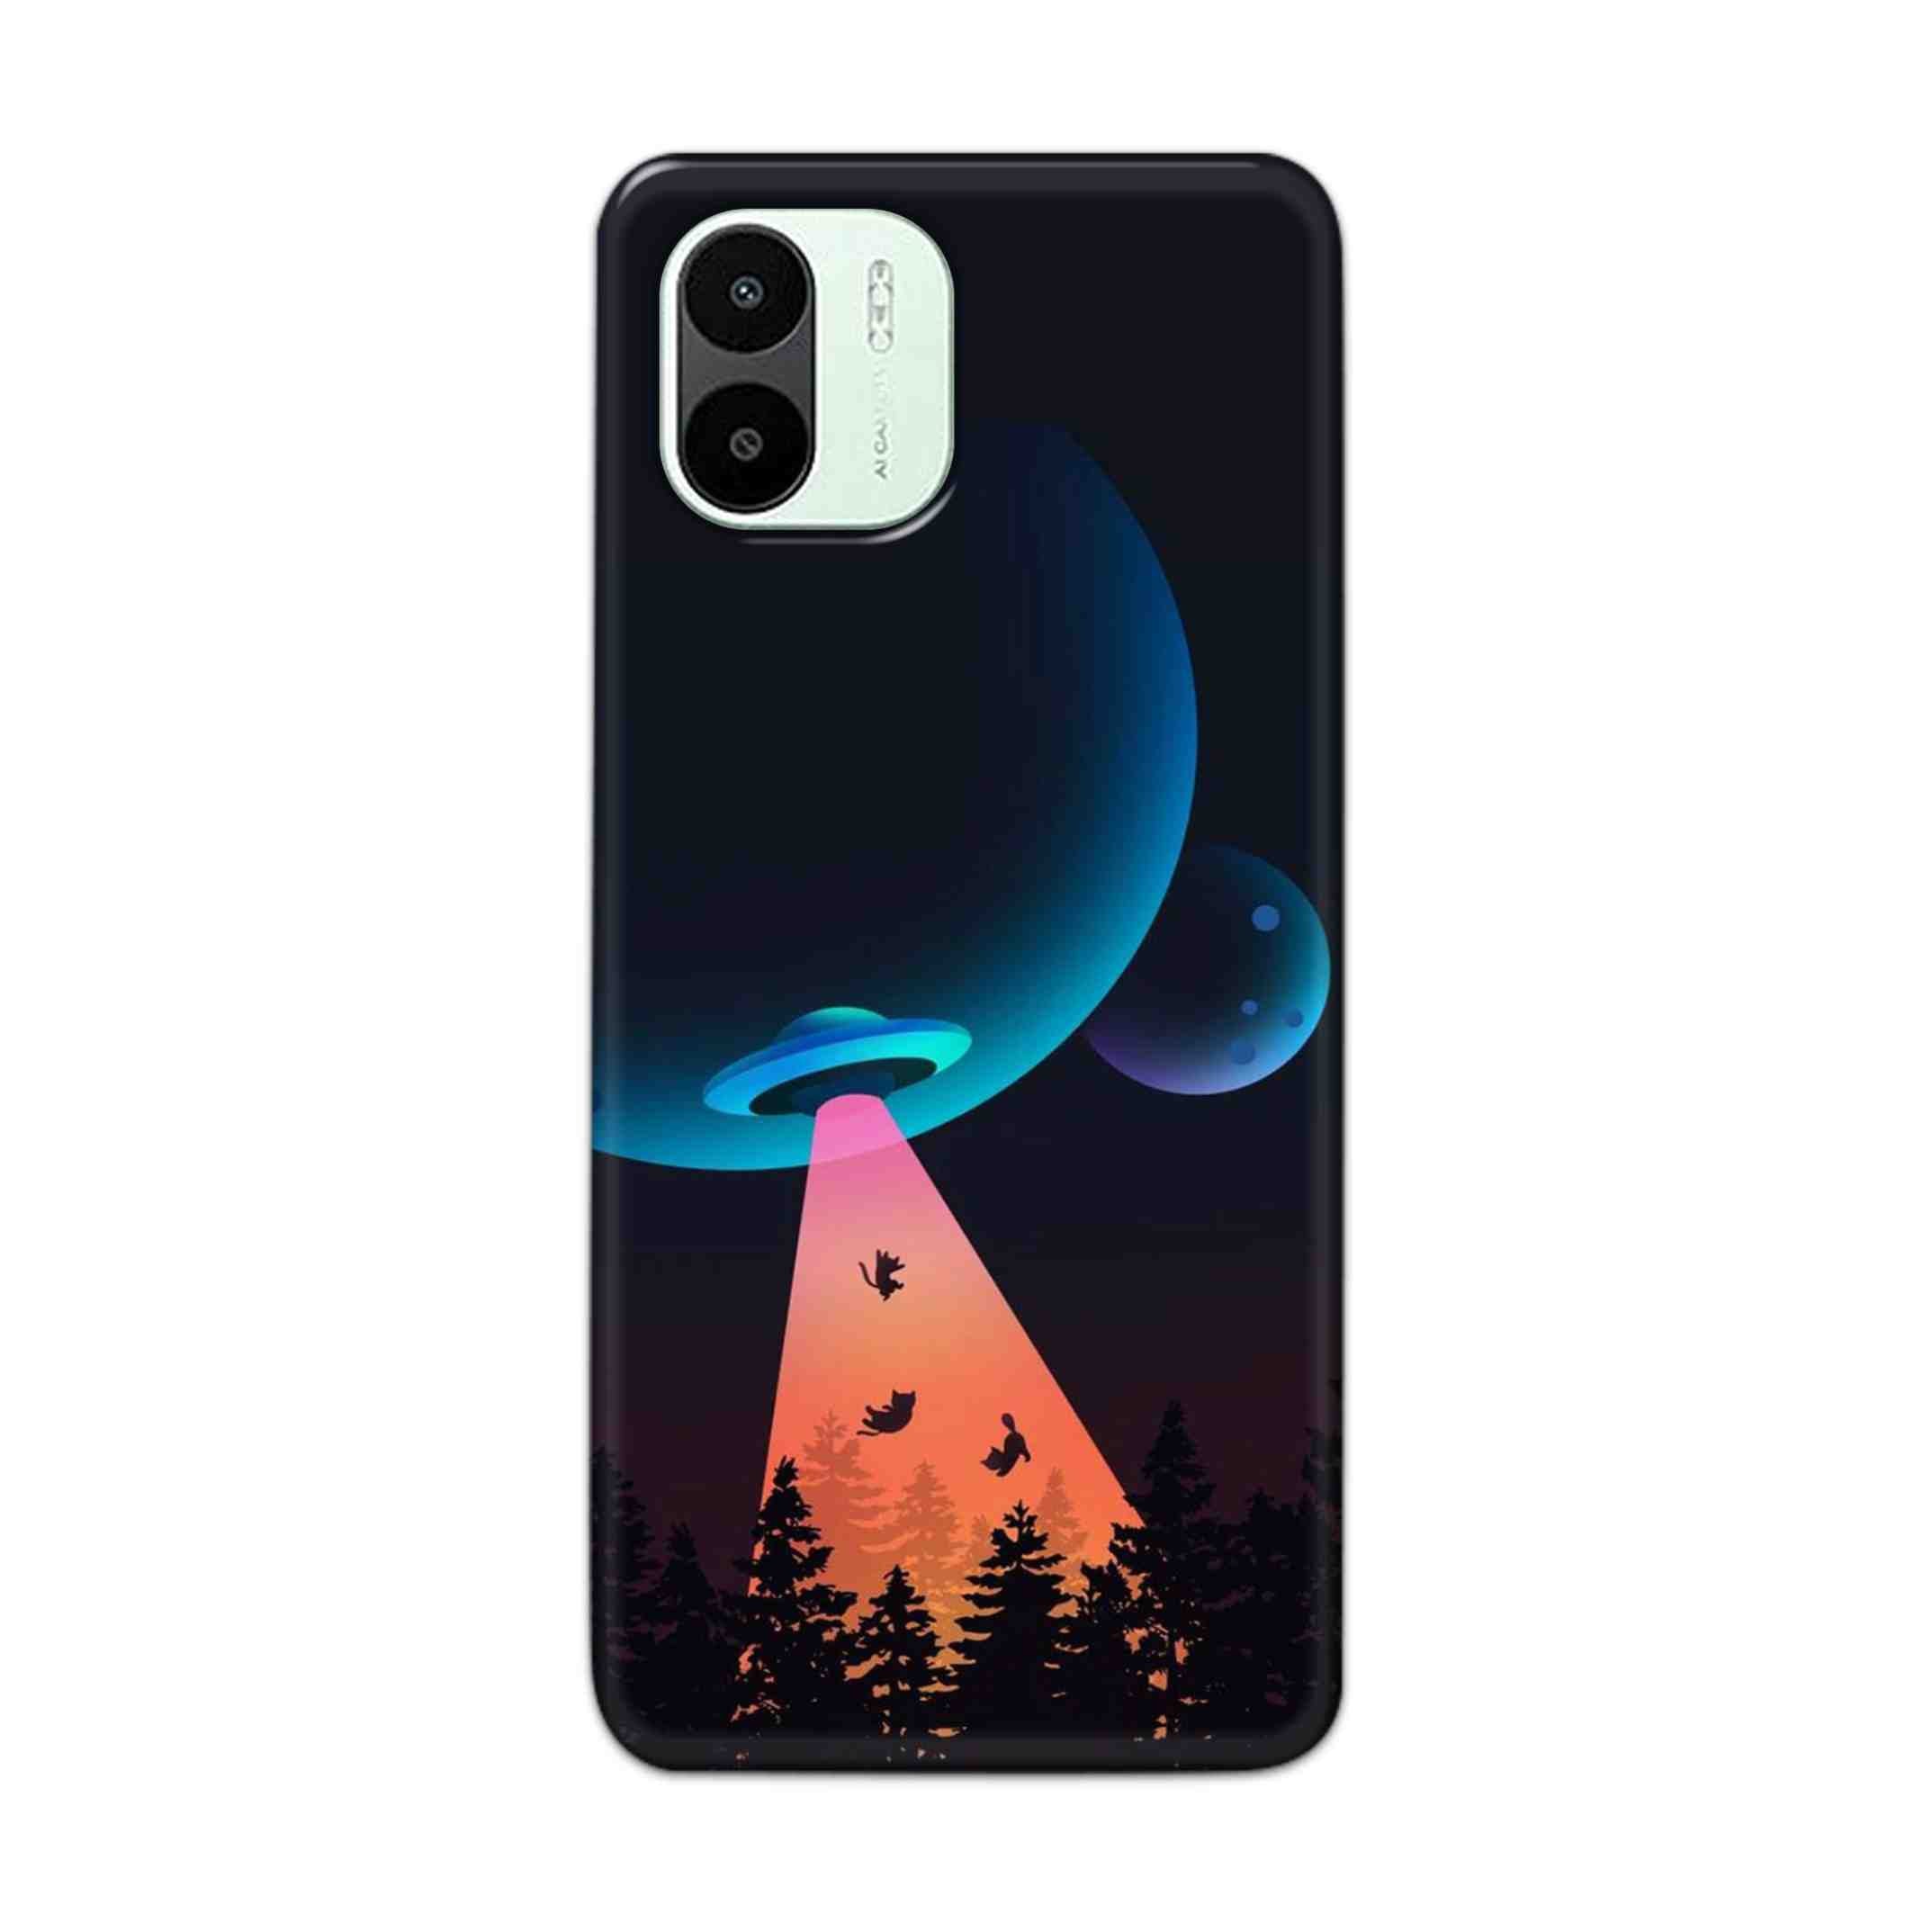 Buy Spaceship Hard Back Mobile Phone Case Cover For Xiaomi Redmi A1 5G Online